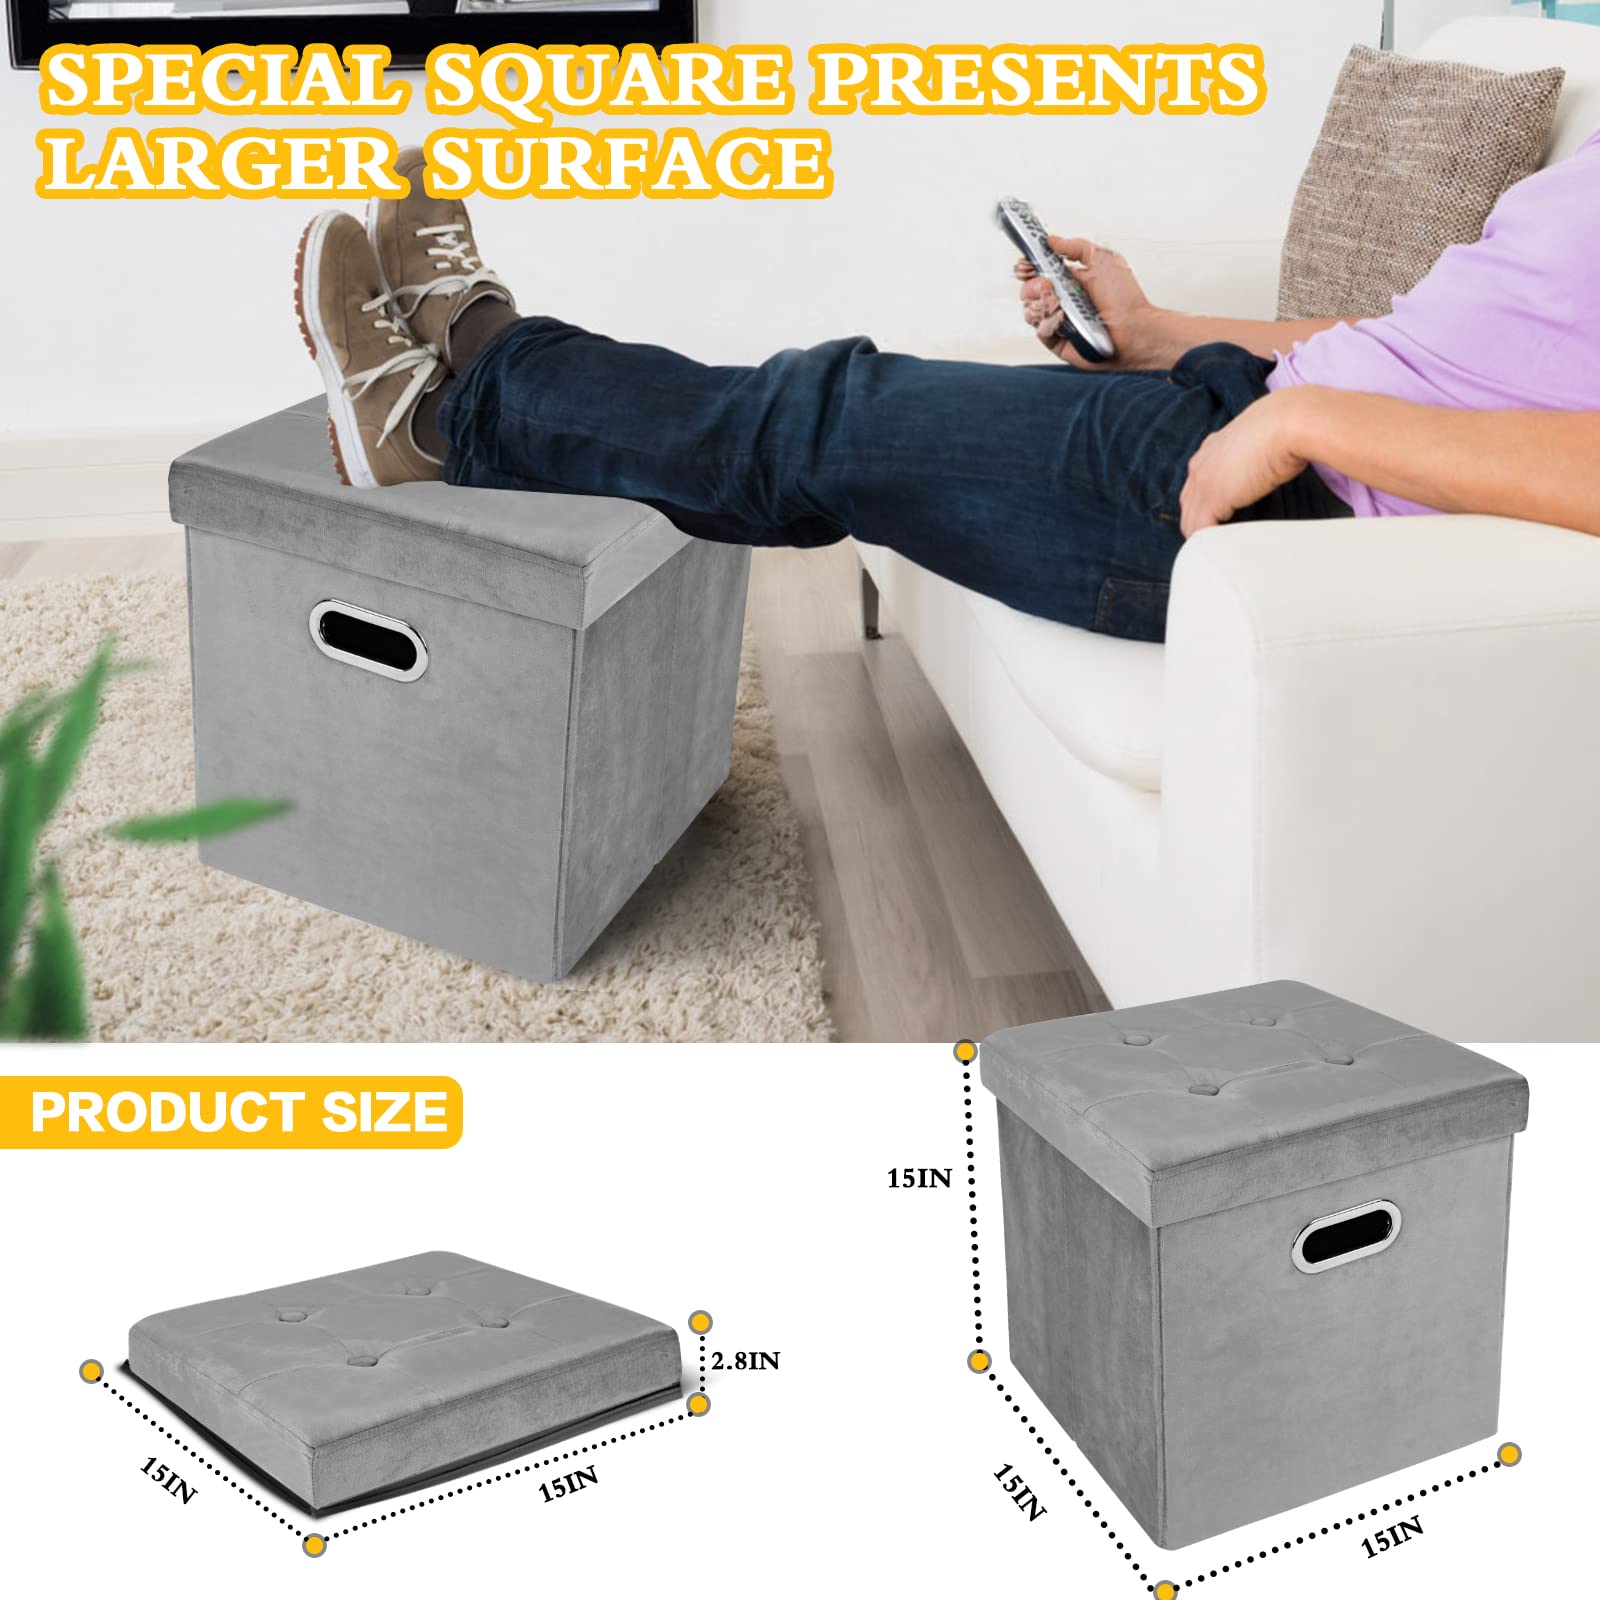 ACEHOME Storage Ottoman Cube, Velvet Button Tufted Ottoman with Storage, Folding Square Storage Ottoman with Tray, Cube Ottoman Storage with Handles, Small Footstool Rest Padded Seat, Grey, 2PC